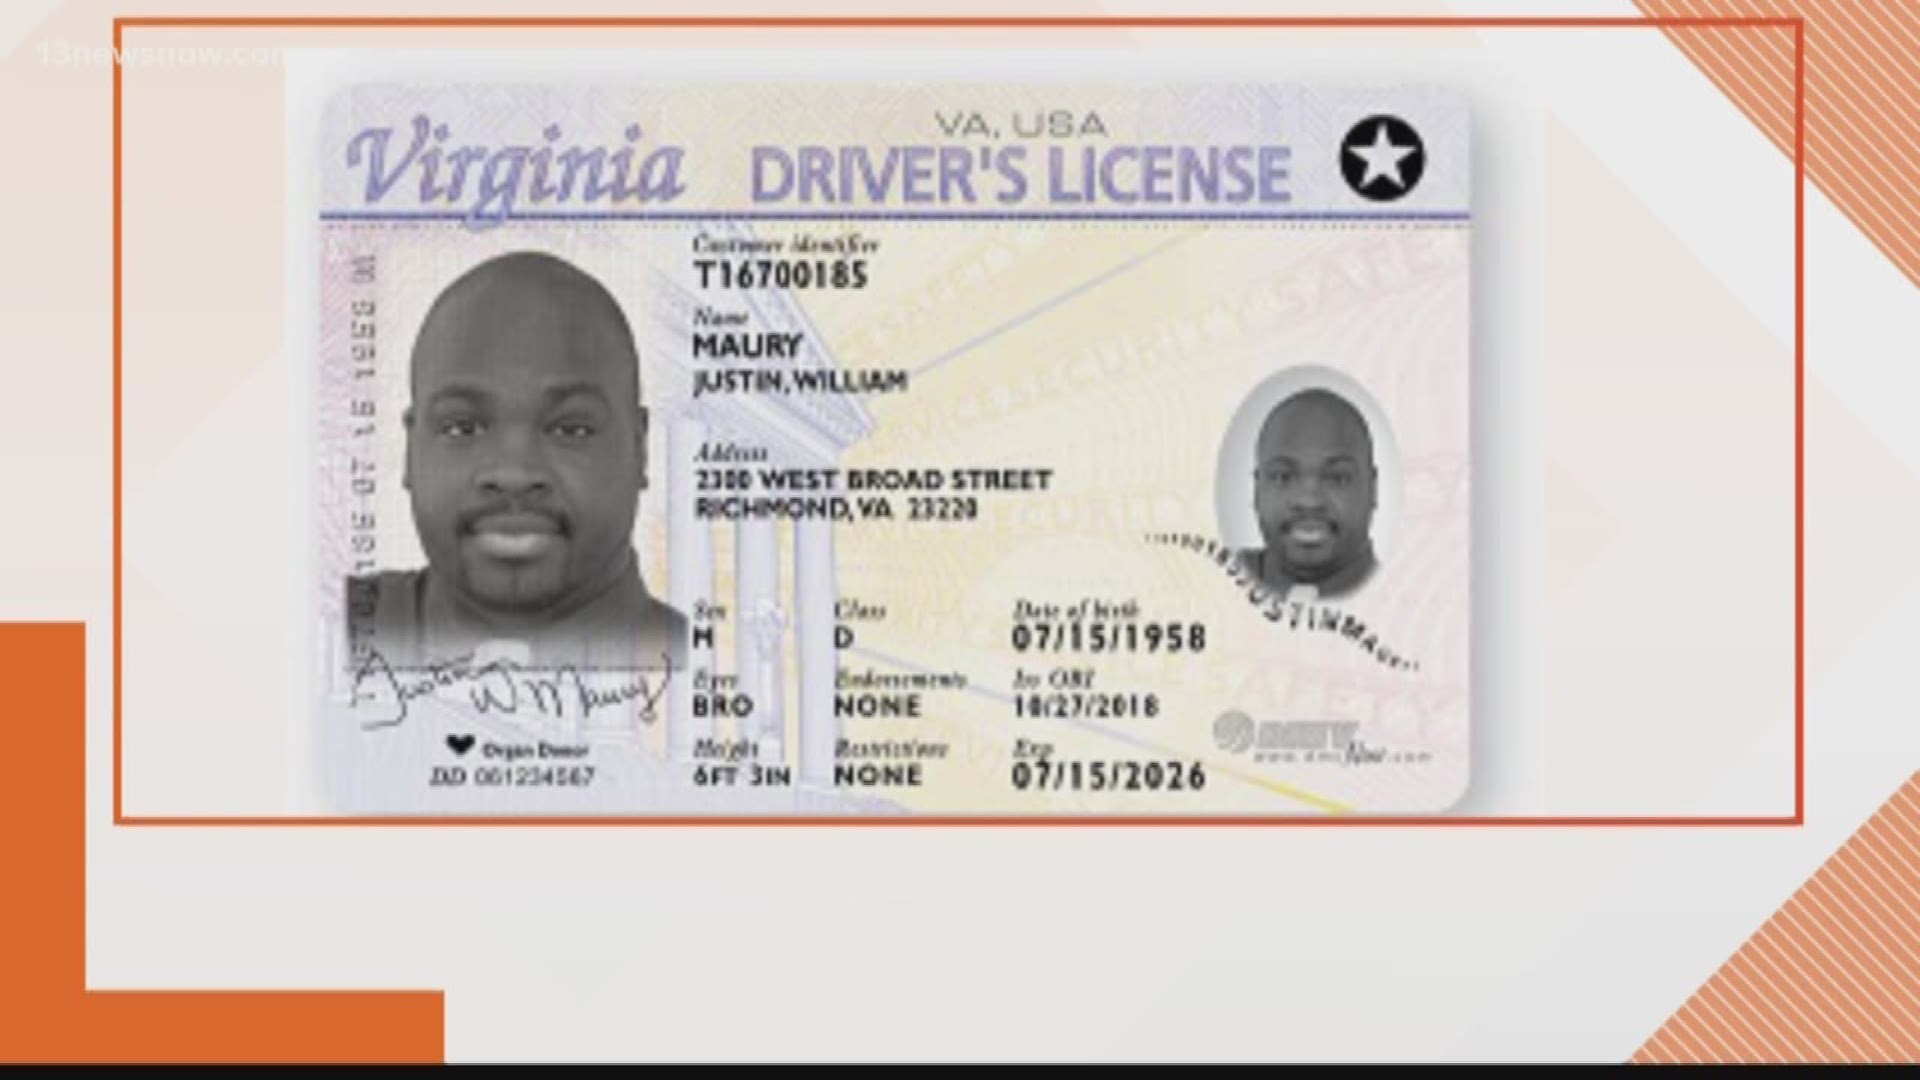 The federal government passed the Real ID Act after the Sept. 11 attacks. Many states did not immediately meet the requirements with state-issued ID, but the federal government is done granting extensions so Virginia is finally complying and you can get y